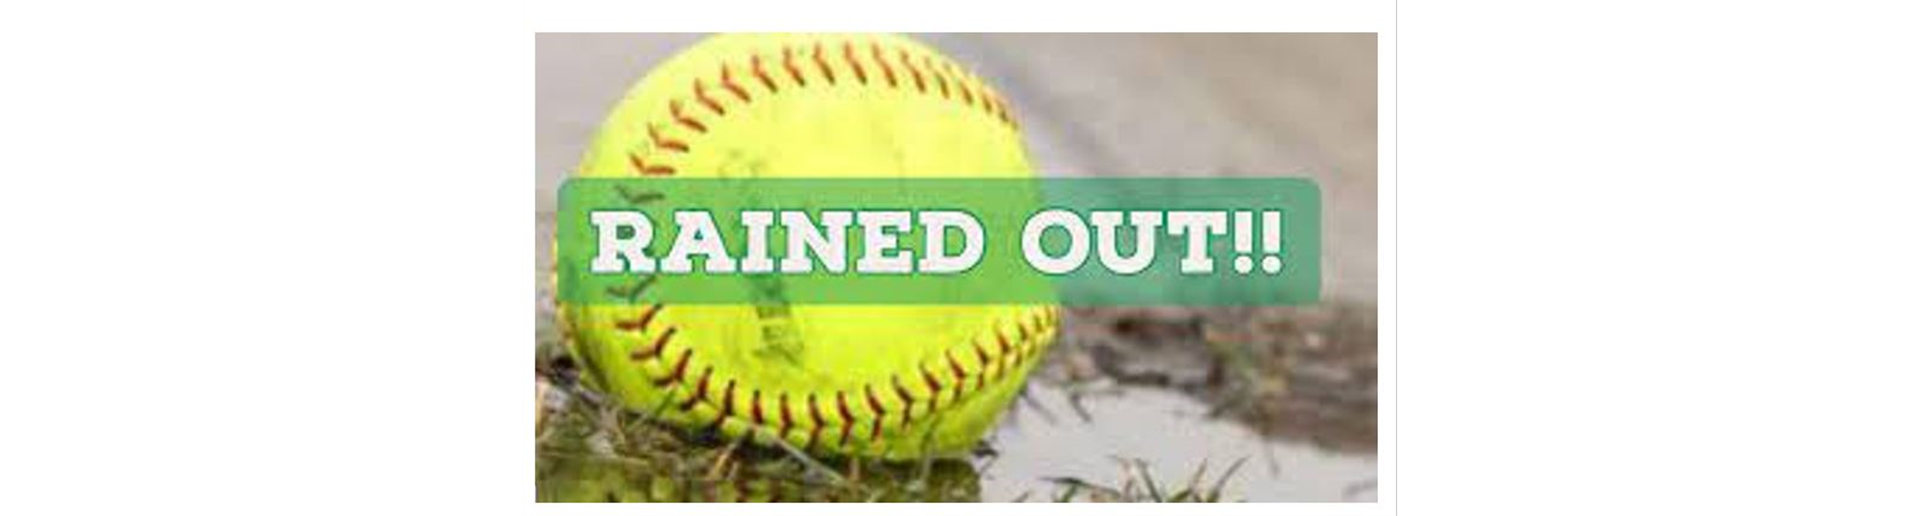 All games Canceled  for today and tomorrow! 03-22 and 23